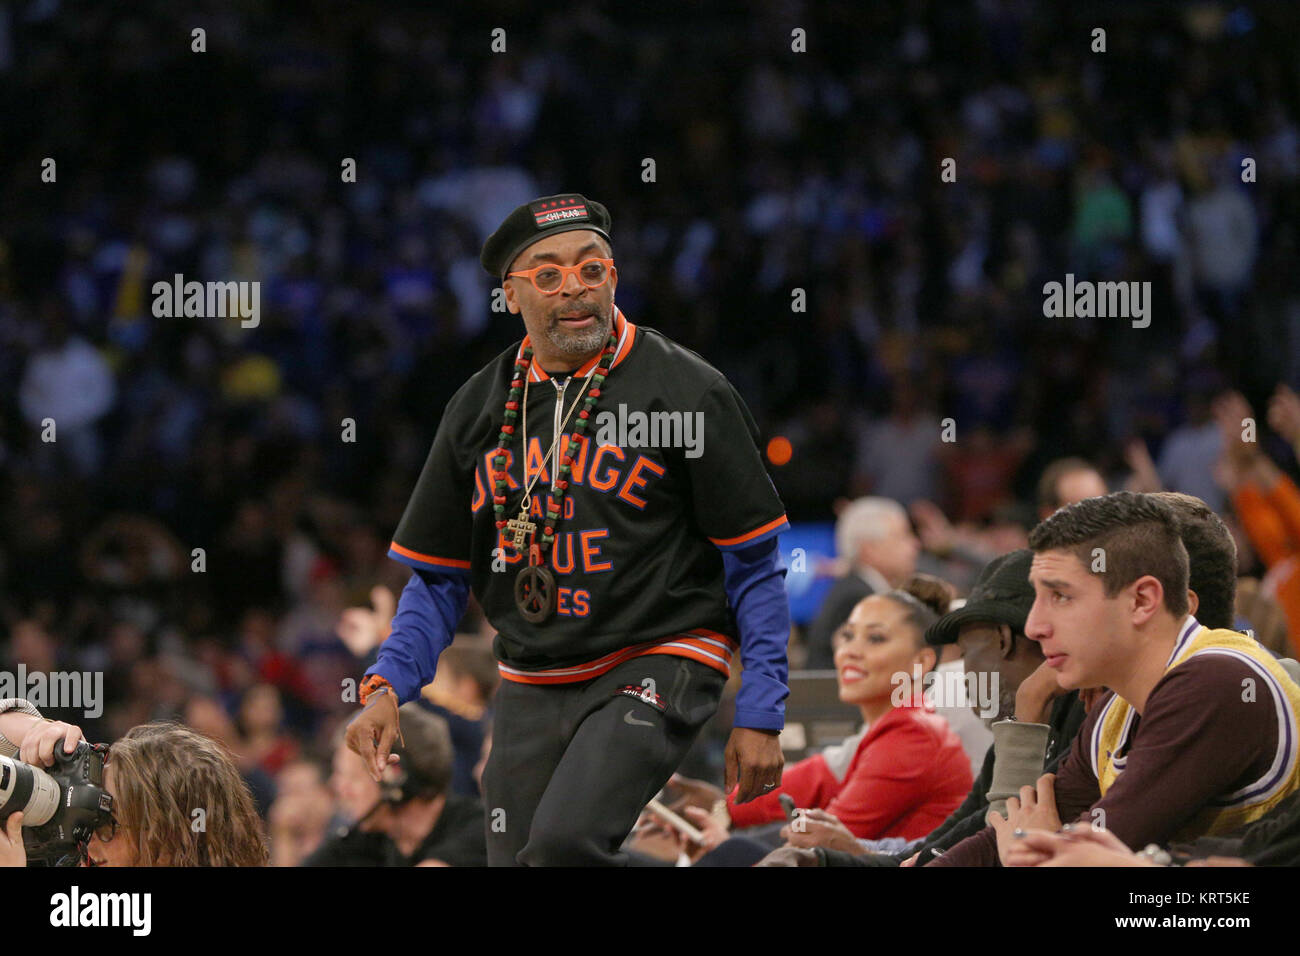 NEW YORK, NY - NOVEMBER 08: (Embargoed till November 10, 2015) Magic Johnson, Tracy Morgan with wife Megan Wollover sit with Michael K. Williams and  Director Spike Lee at the New York Knicks vs Los Angeles Lakers game at Madison Square Garden on November 8, 2015 in New York City.   People:  Spike Lee Stock Photo